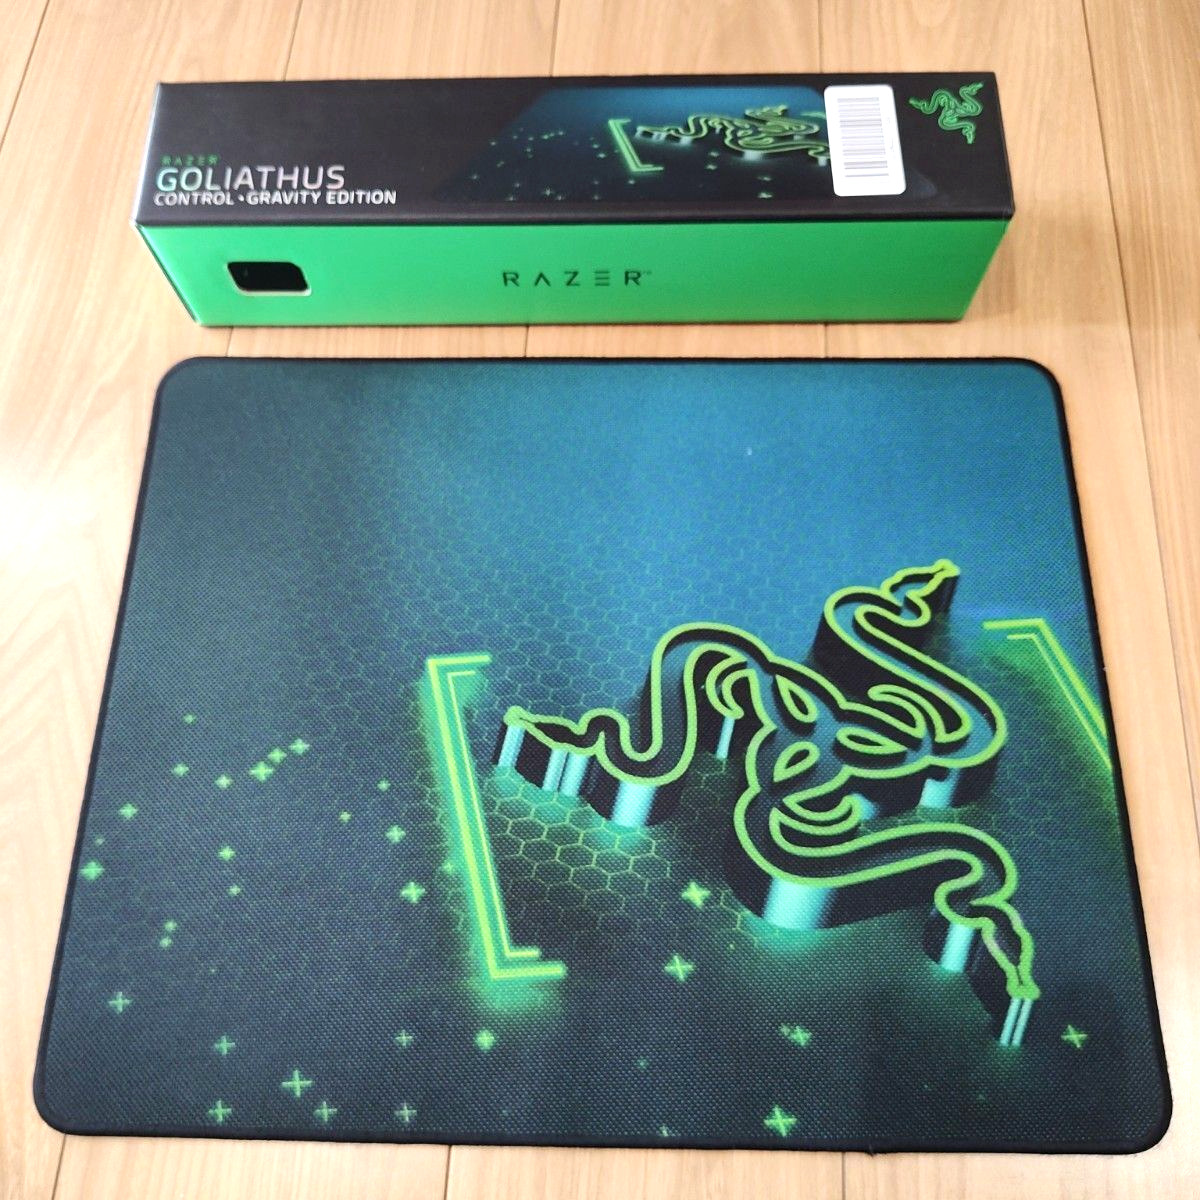 Razer GOLIATHUS CONTROL-GRAVITY Edition Mouse Pad Used With Box 17.5 x 14.1 inch